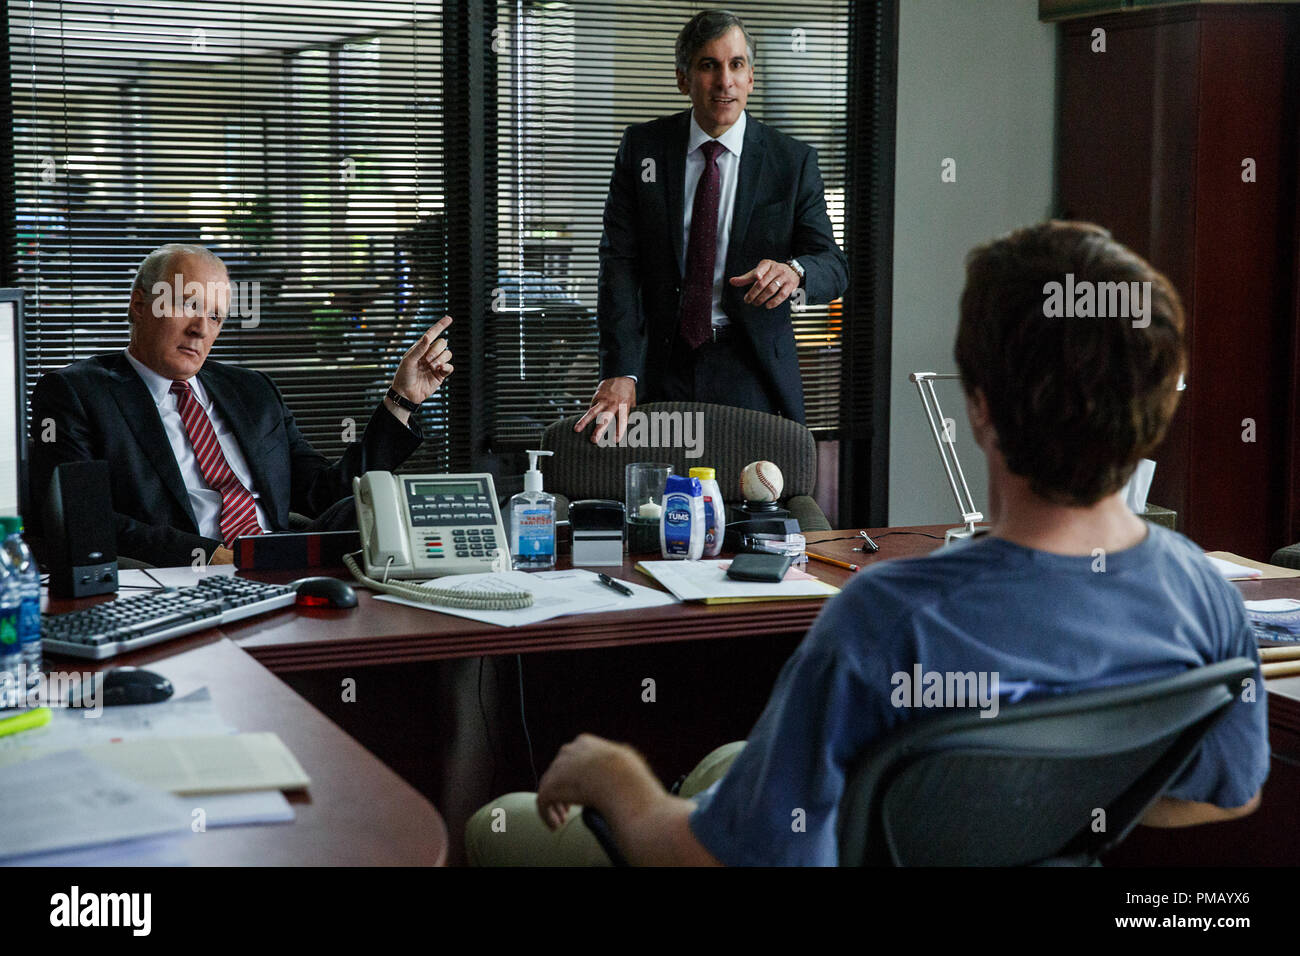 Left to right: Tracy Letts plays Lawrence Fields, Wayne Pere plays Martin Blaine and Christian Bale plays Michael Burry in The Big Short from Paramount Pictures and Regency Enterprises Stock Photo